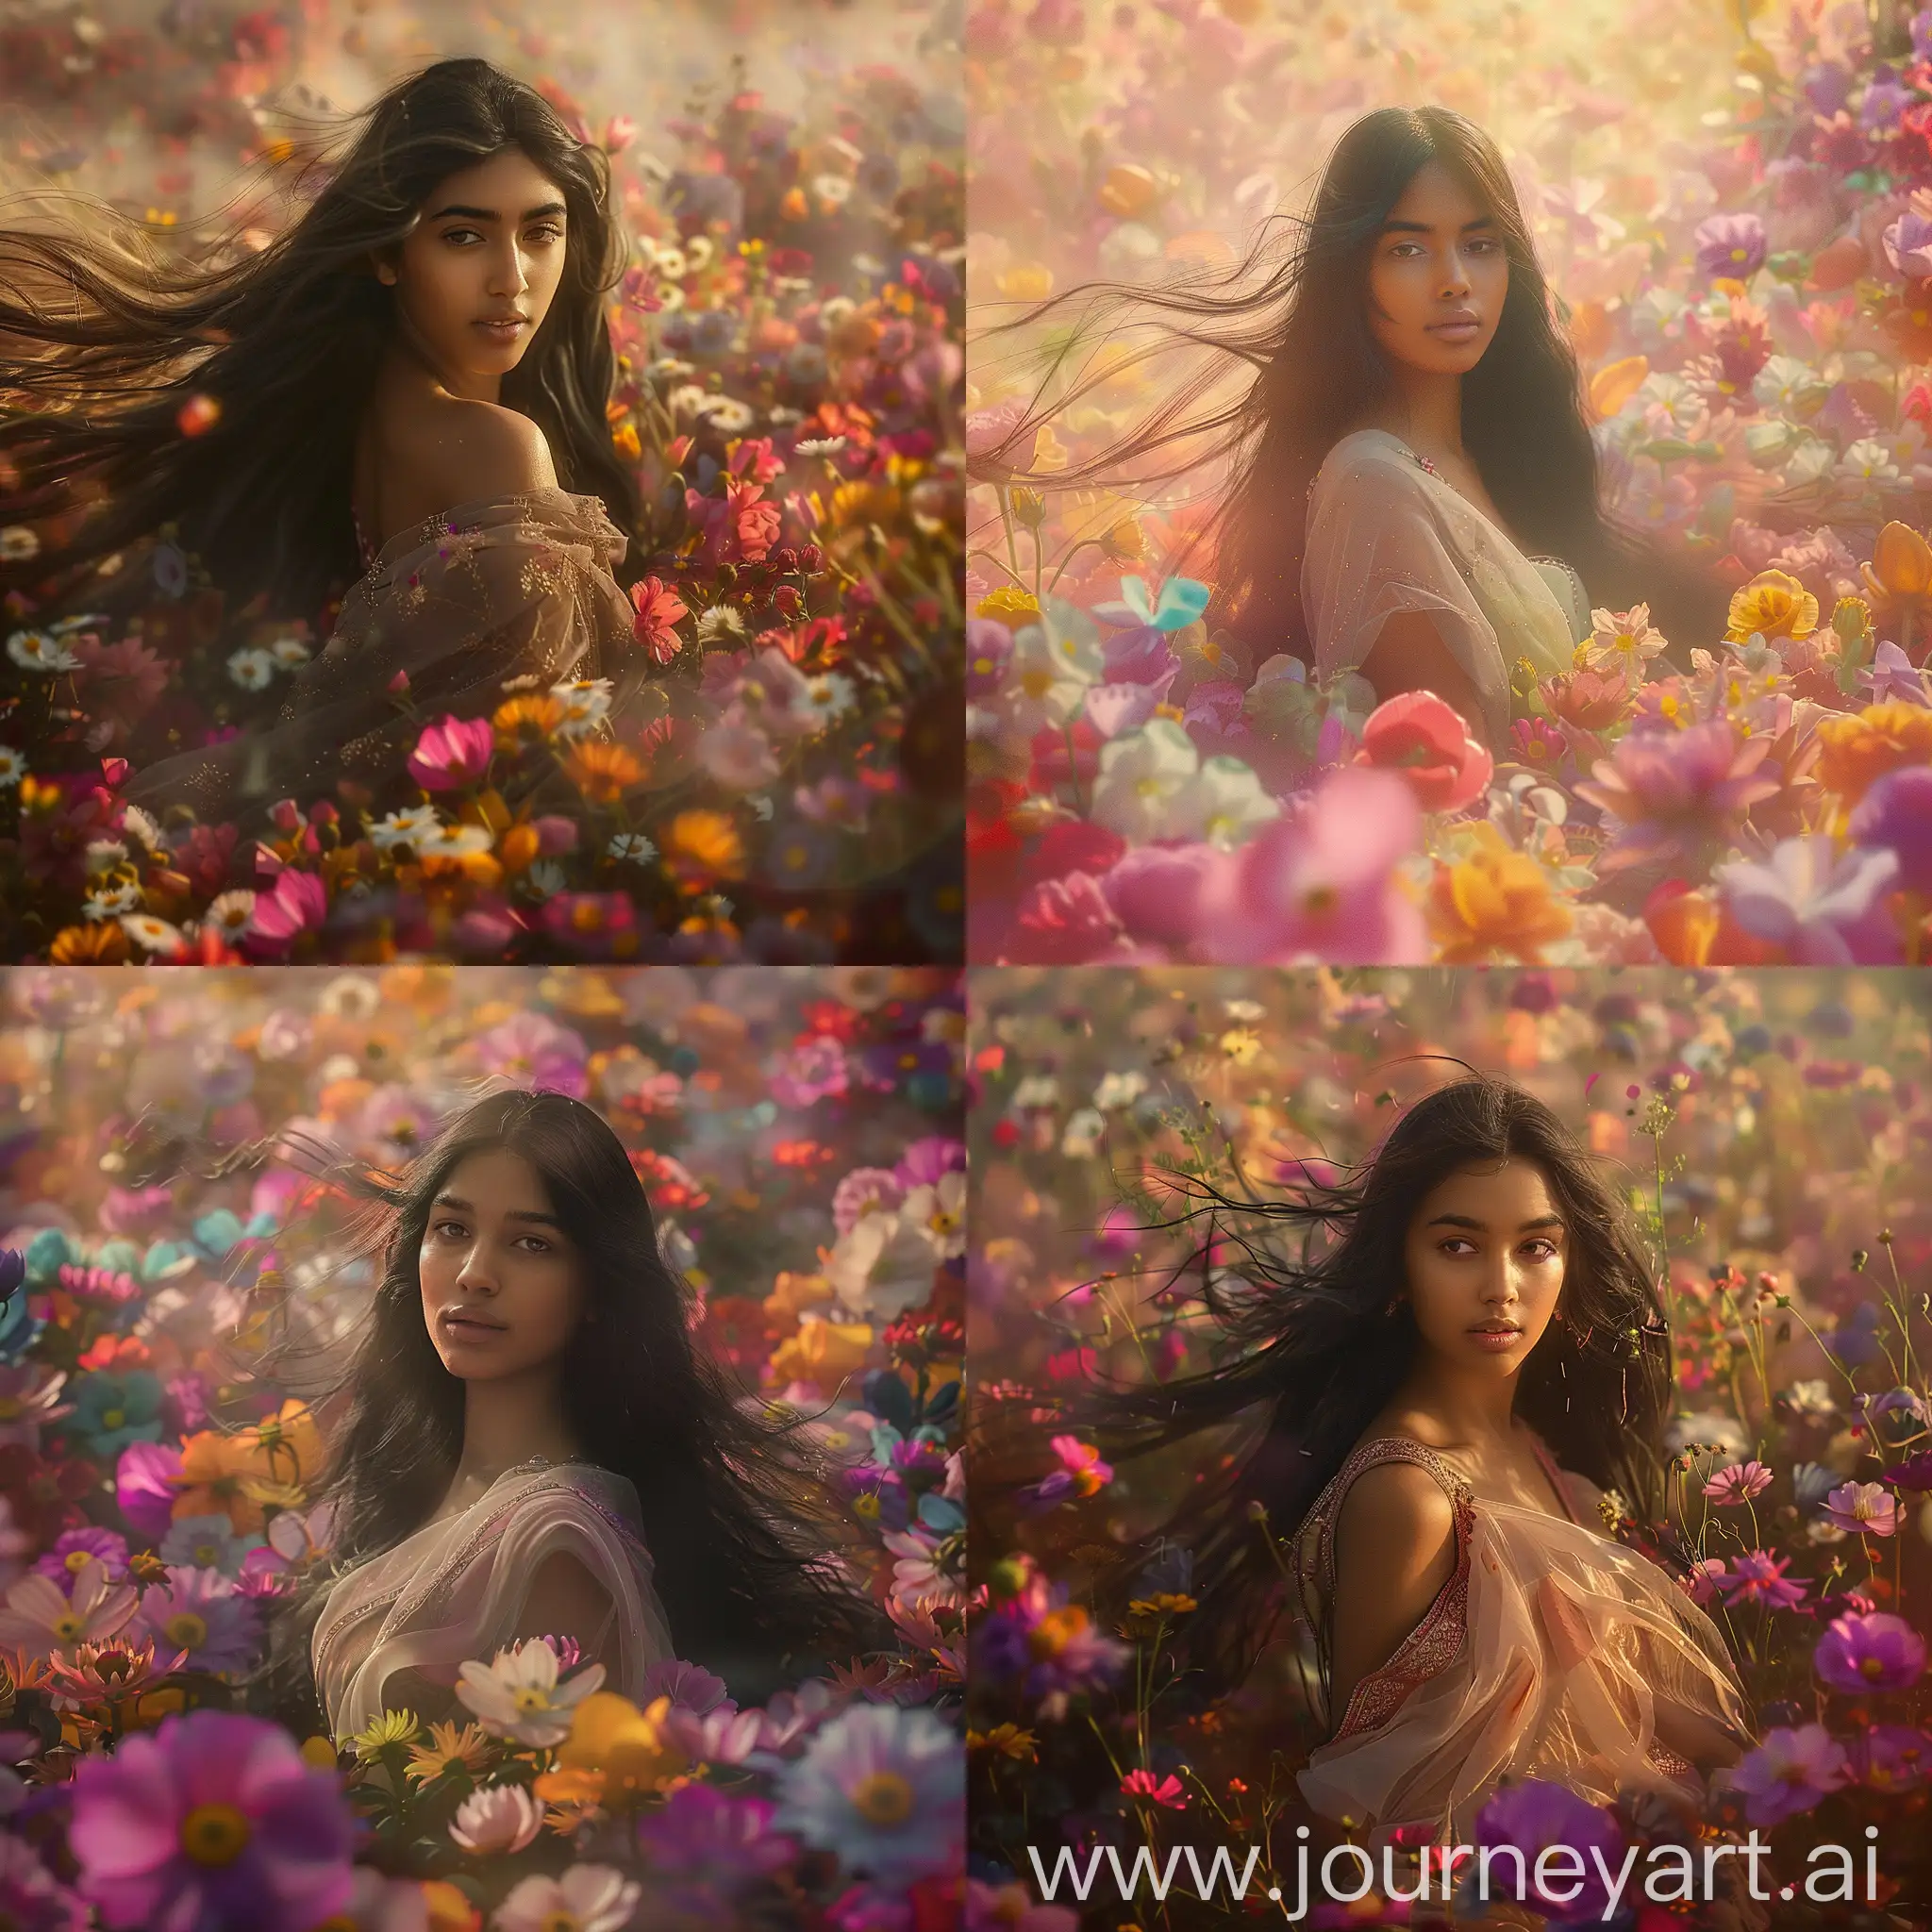 A young Indian woman, her long hair cascading in the wind, stands amidst a vibrant sea of flowers. Bathed in soft, cinematic light, she exudes a serene beauty, her skin glowing with lifelike detail.